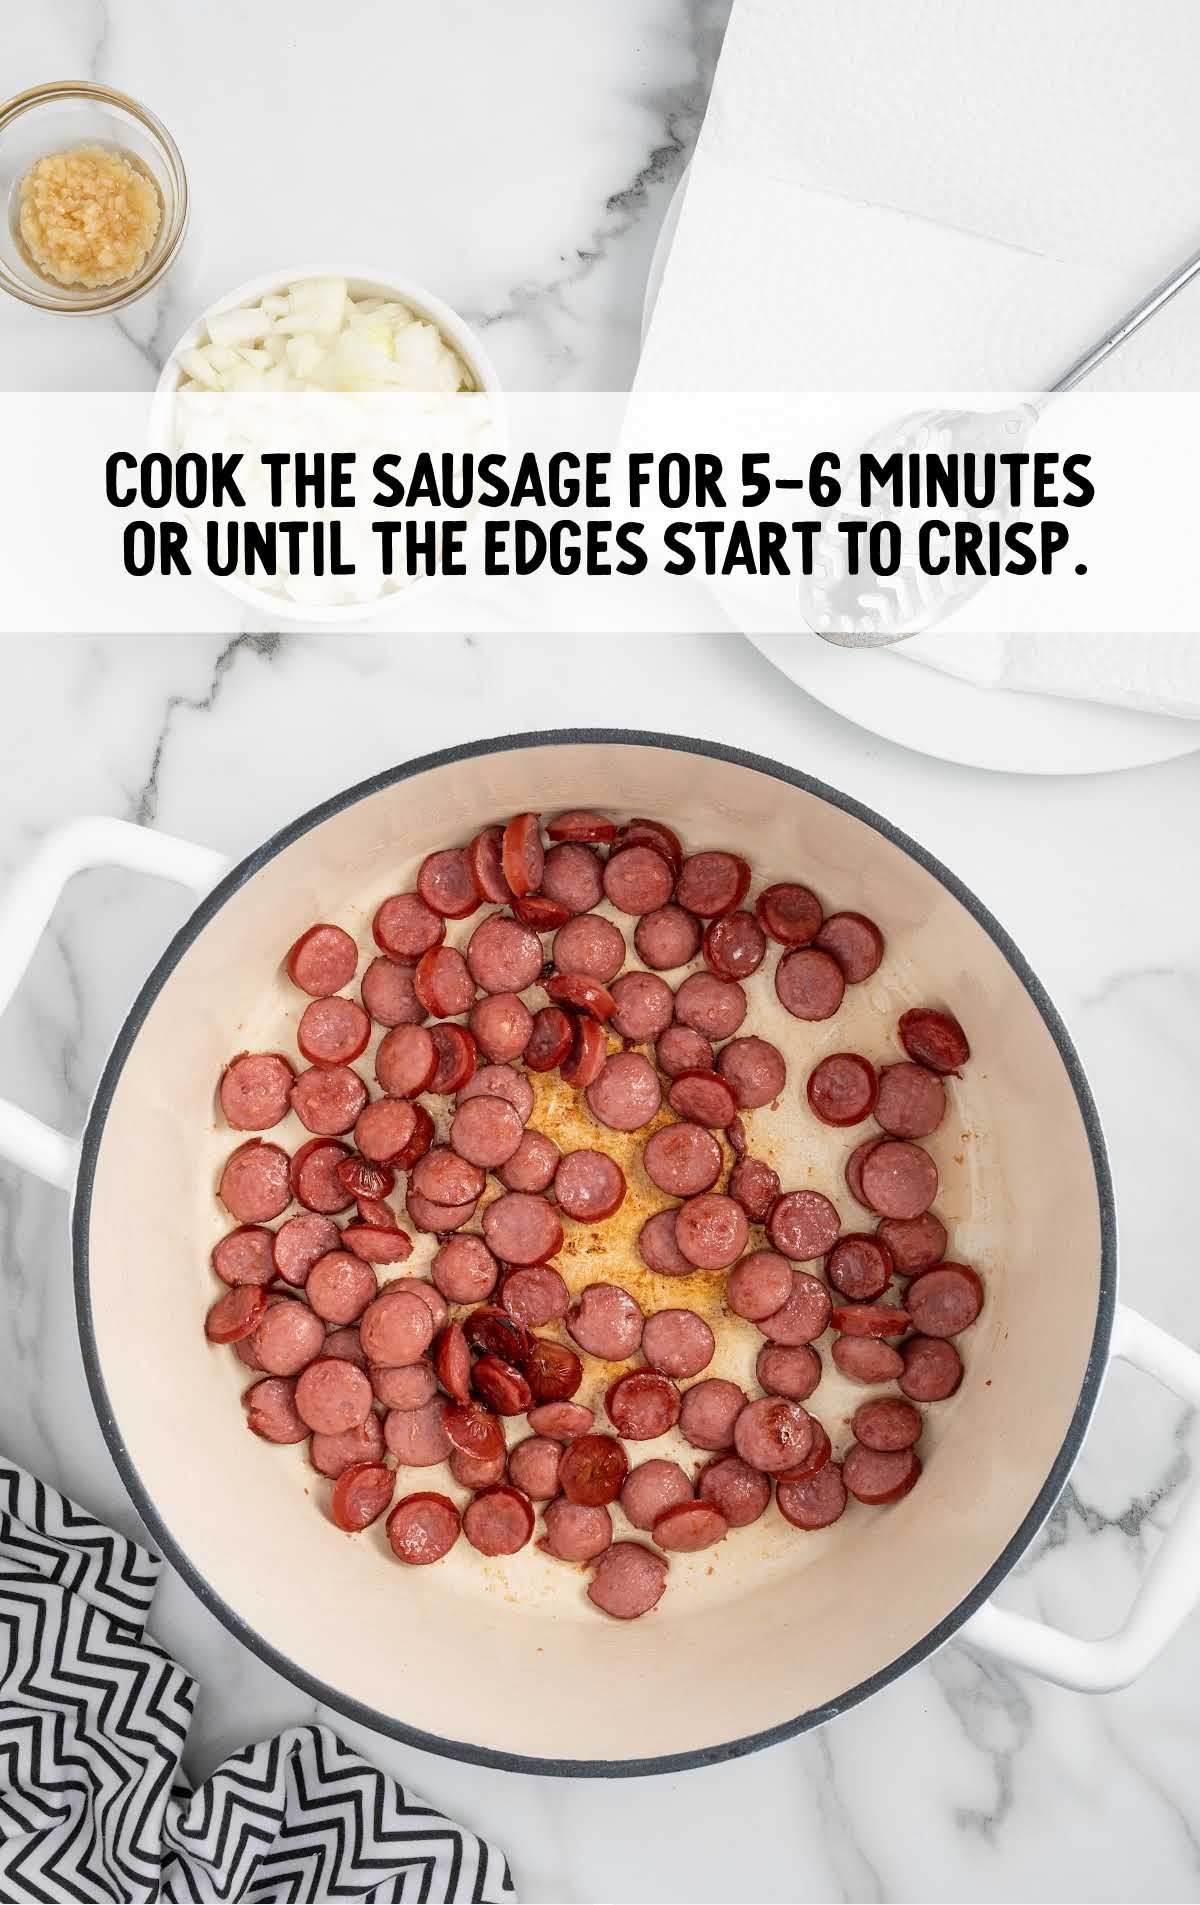 sausage cooked for 5-6 minutes